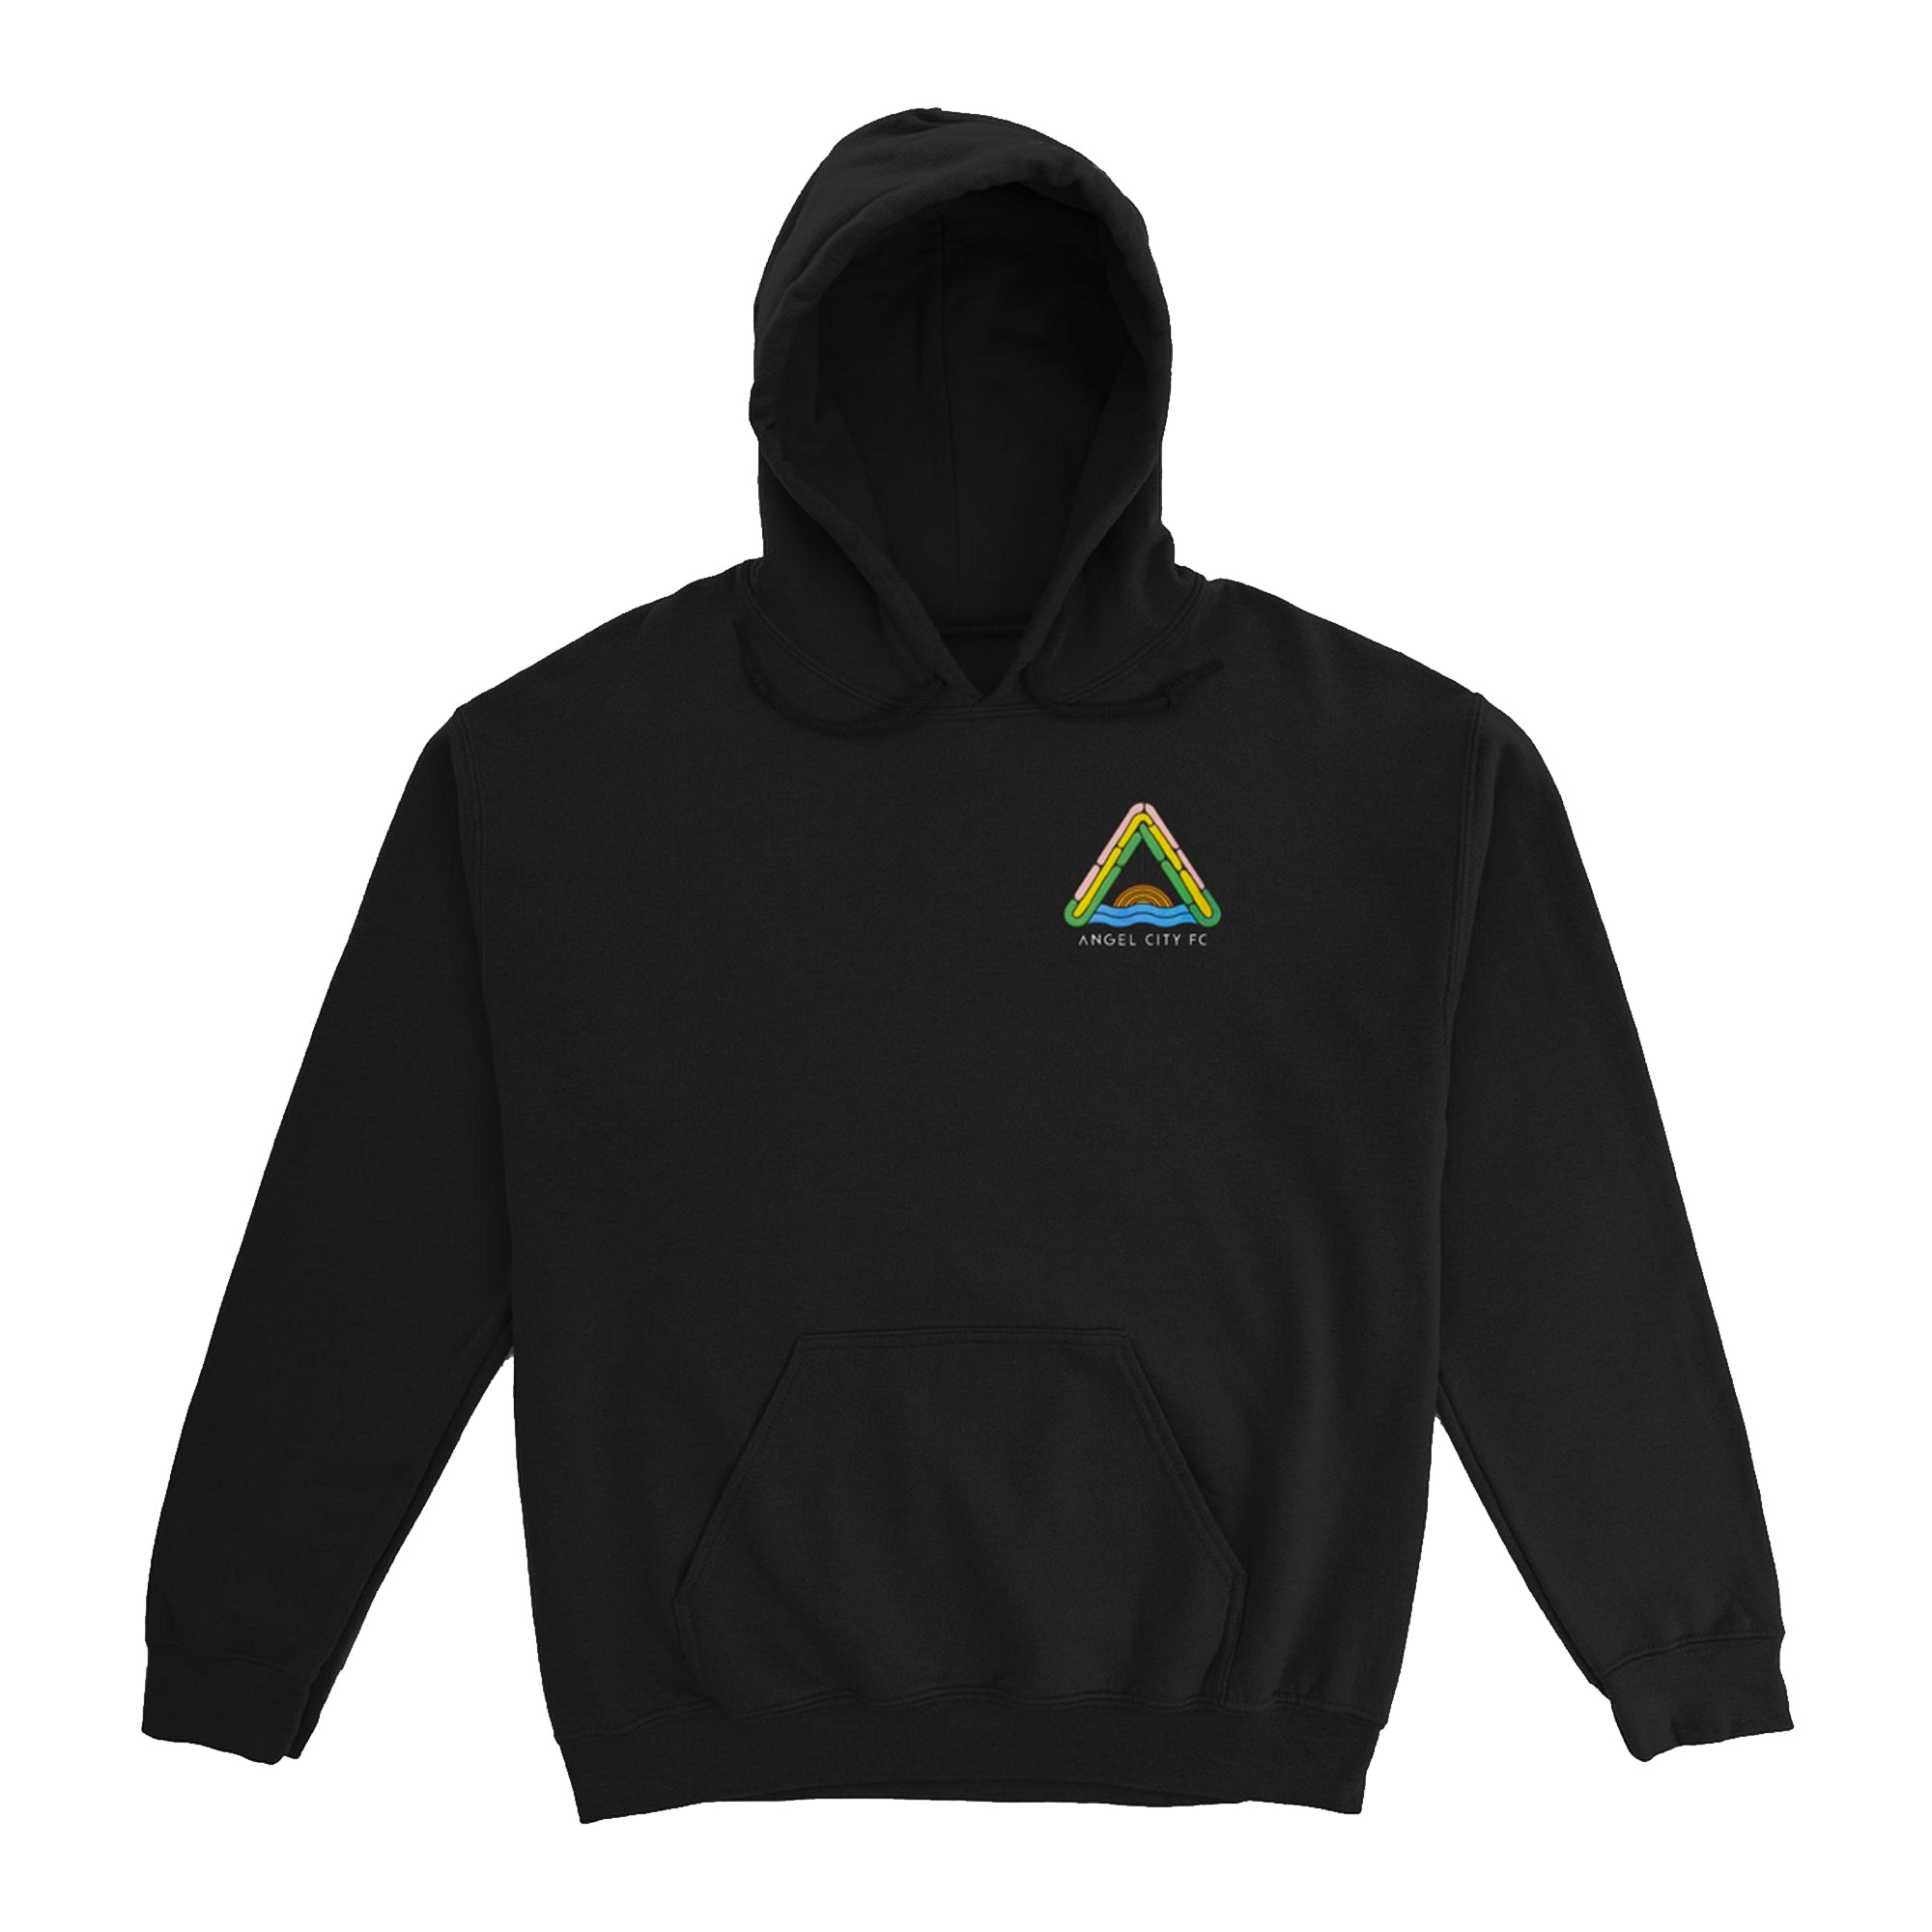 ARP ACFC Hoodie - Available in three colors